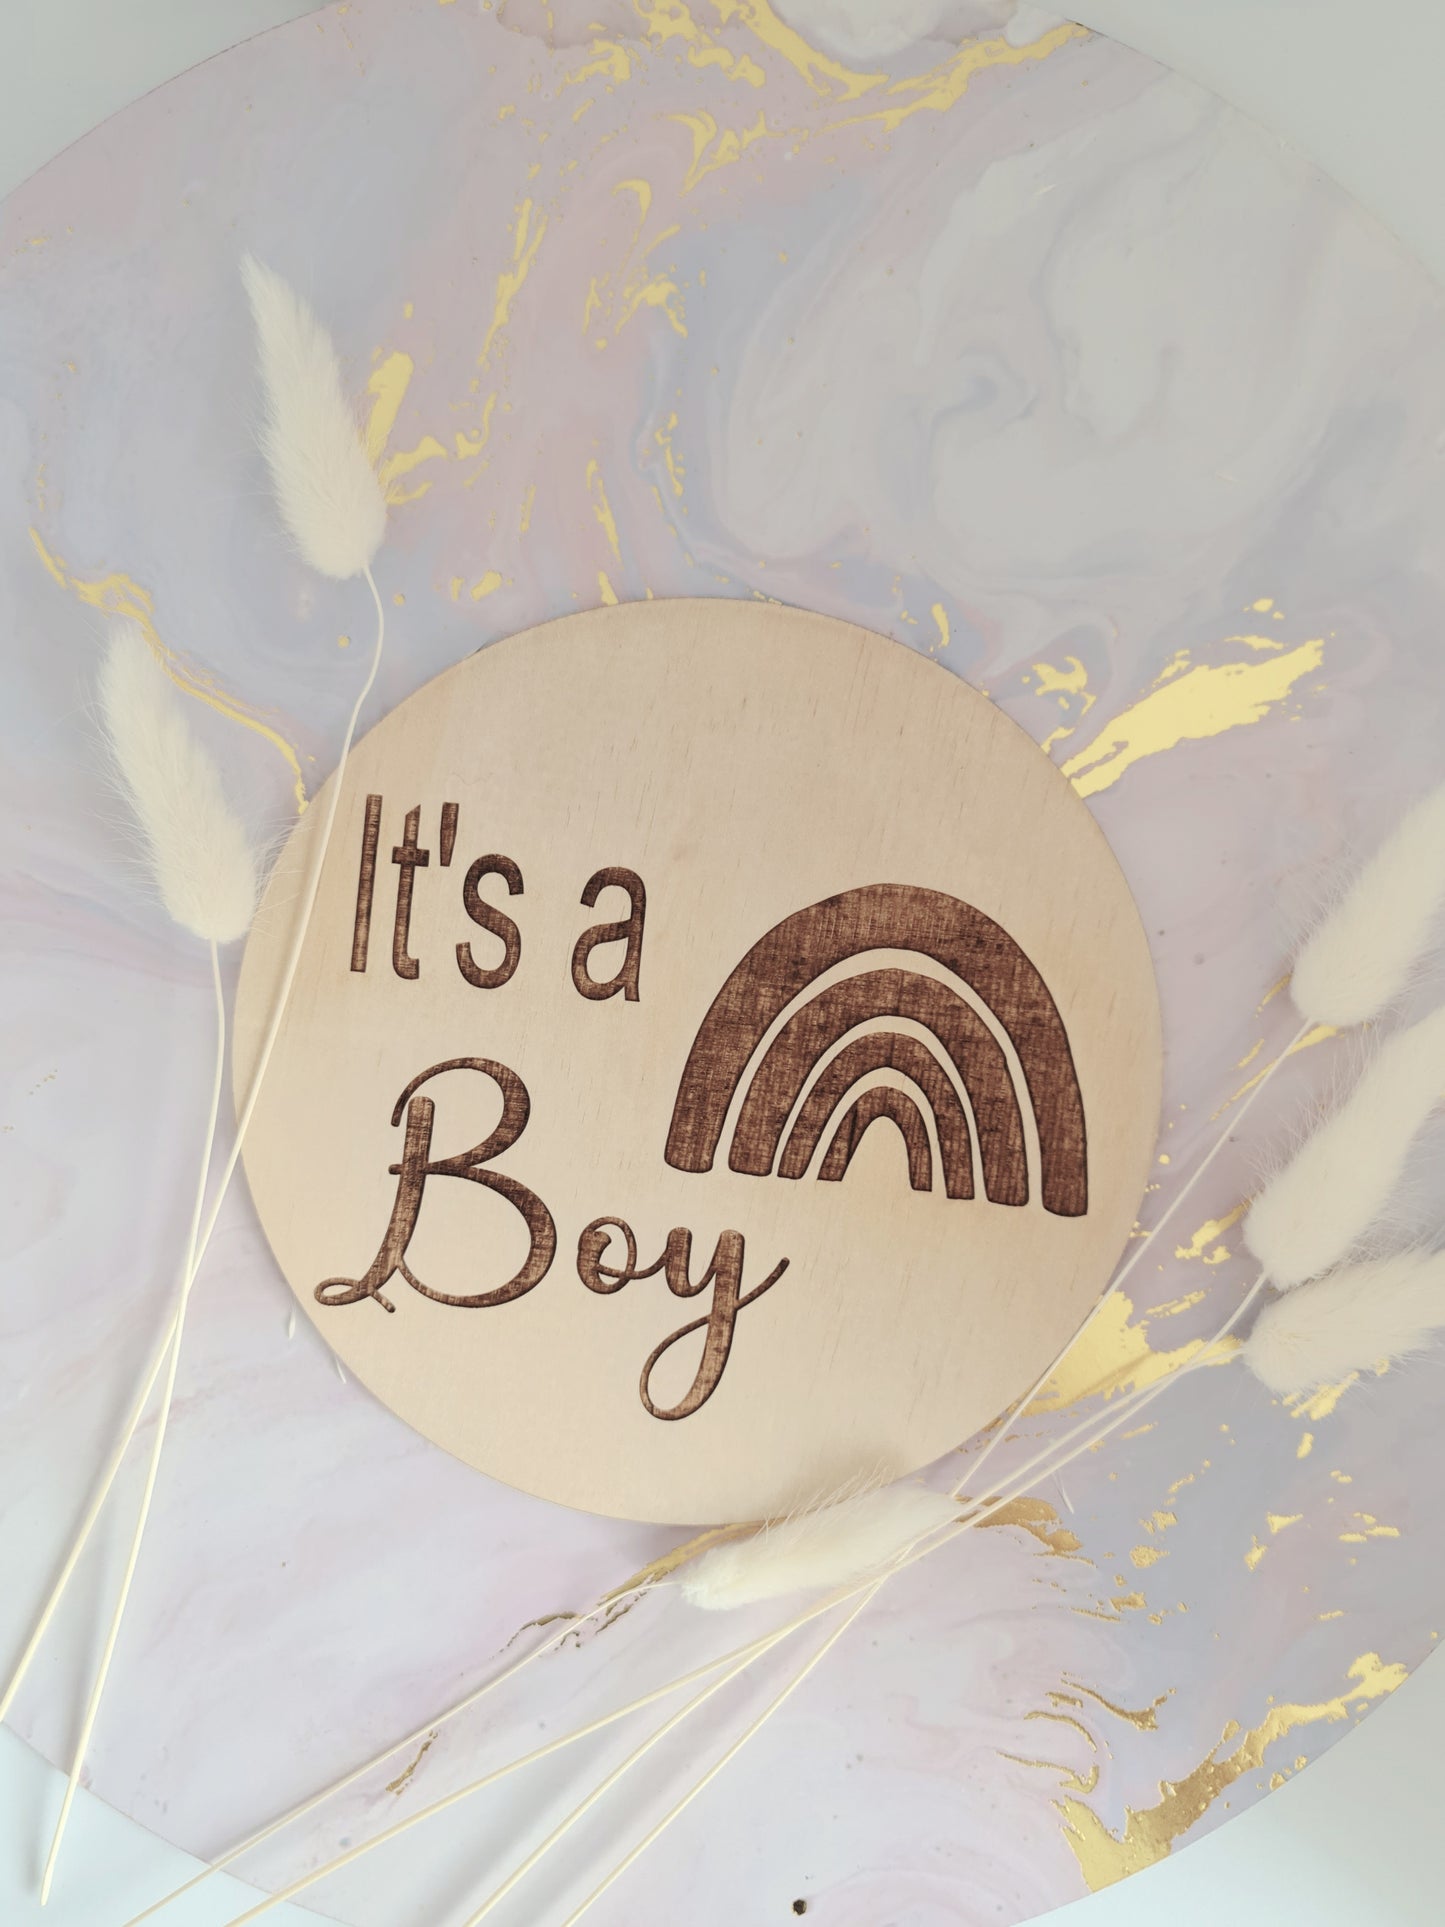 It's a Girl Plaque ◽ It's a Boy Plaque ◽ Baby Announcement ◽ Timber Birth Announcement ◽ Nursery Decor